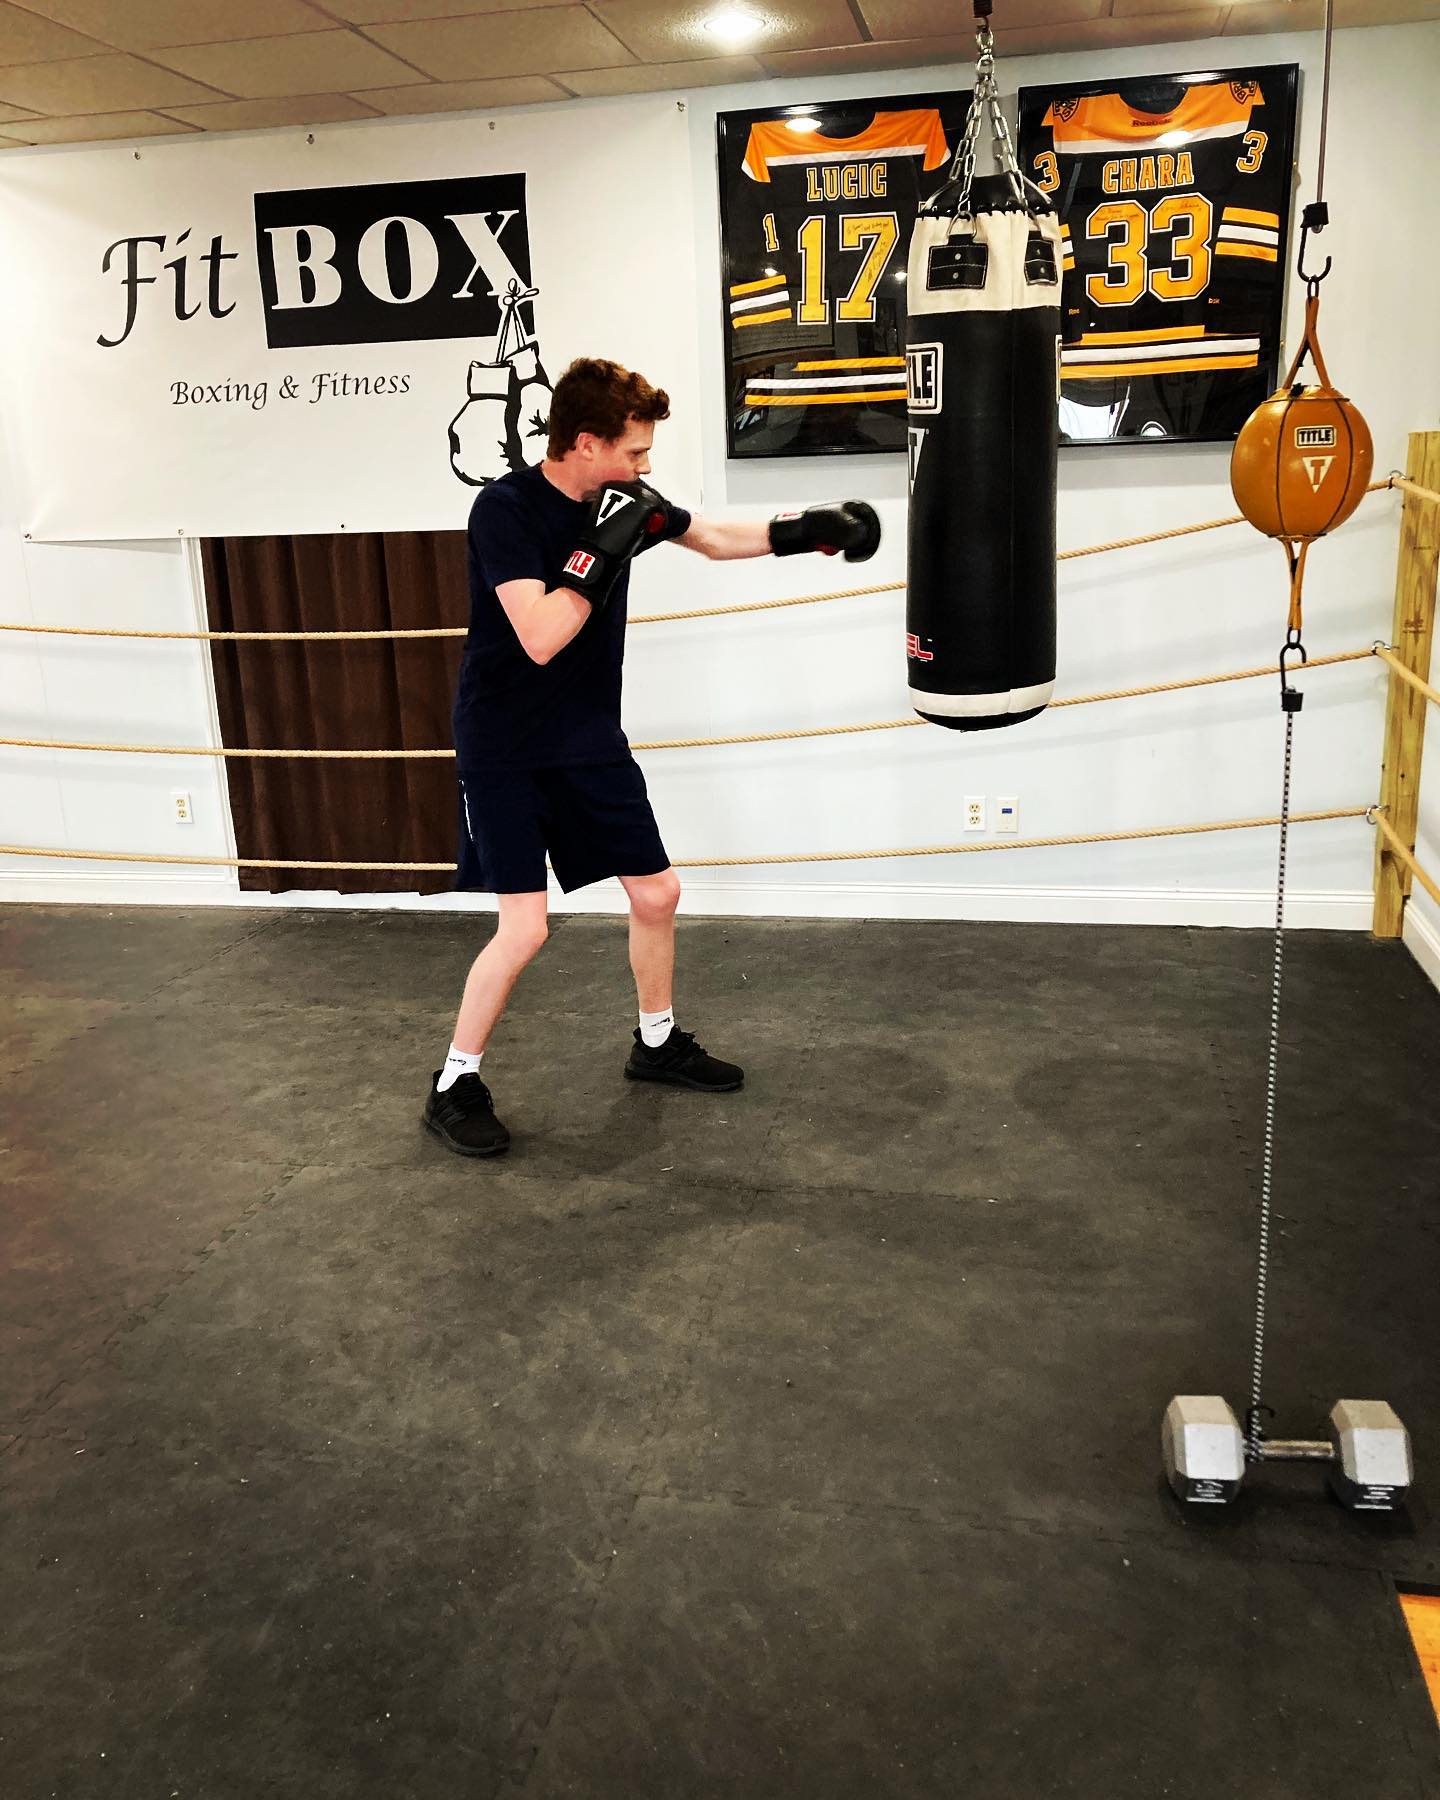 Heavy bag workouts can help to improve technique, provide strength training for power, build better balance and coordination, and even reduce stress. www.fitboxDedham.com @tommymcinerney